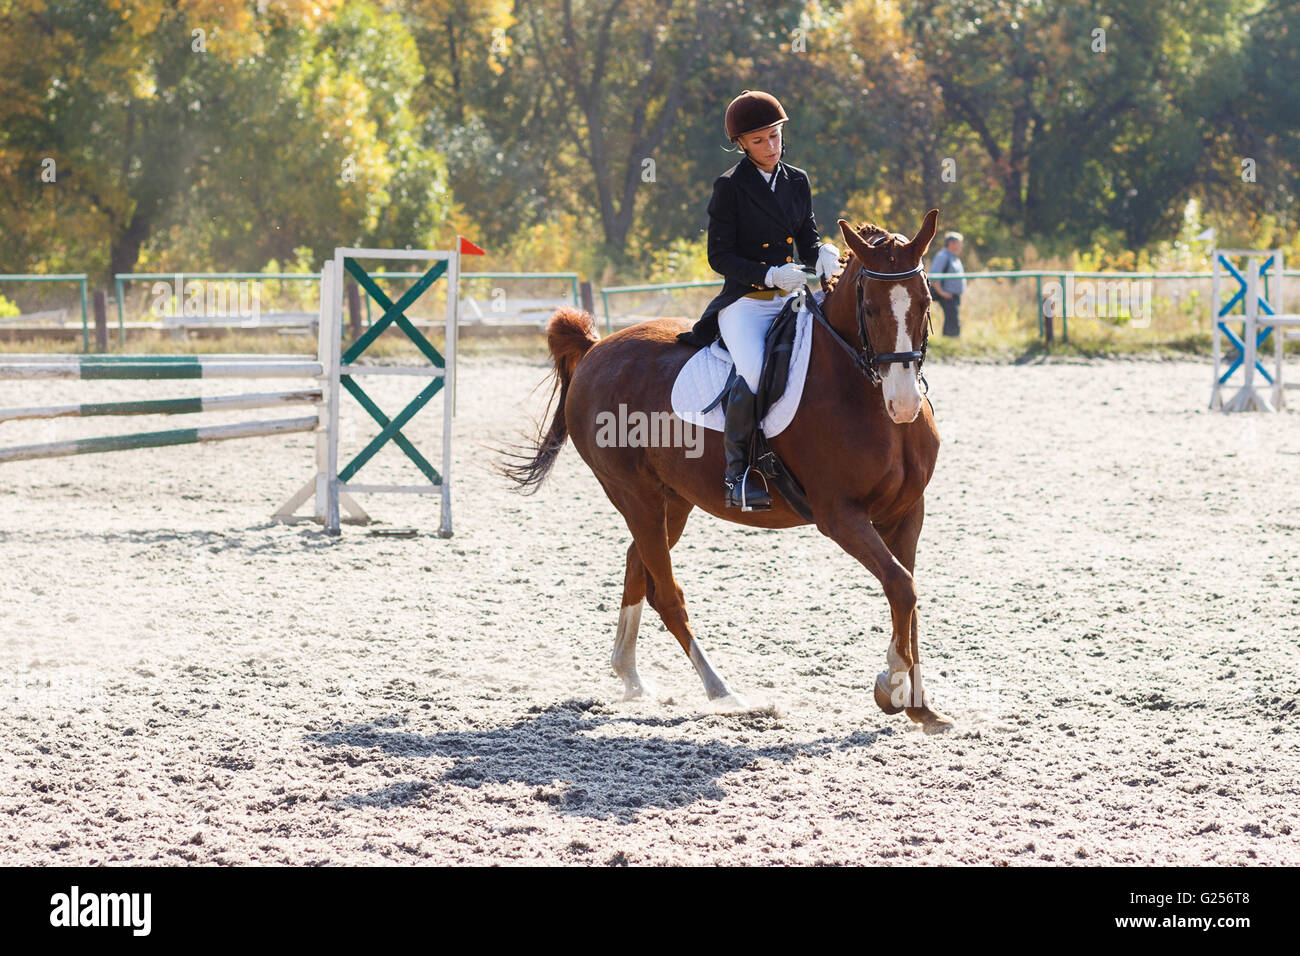 Young sportswoman riding horse in equestrian show jumps competition. Teenage girl ride a horse Stock Photo